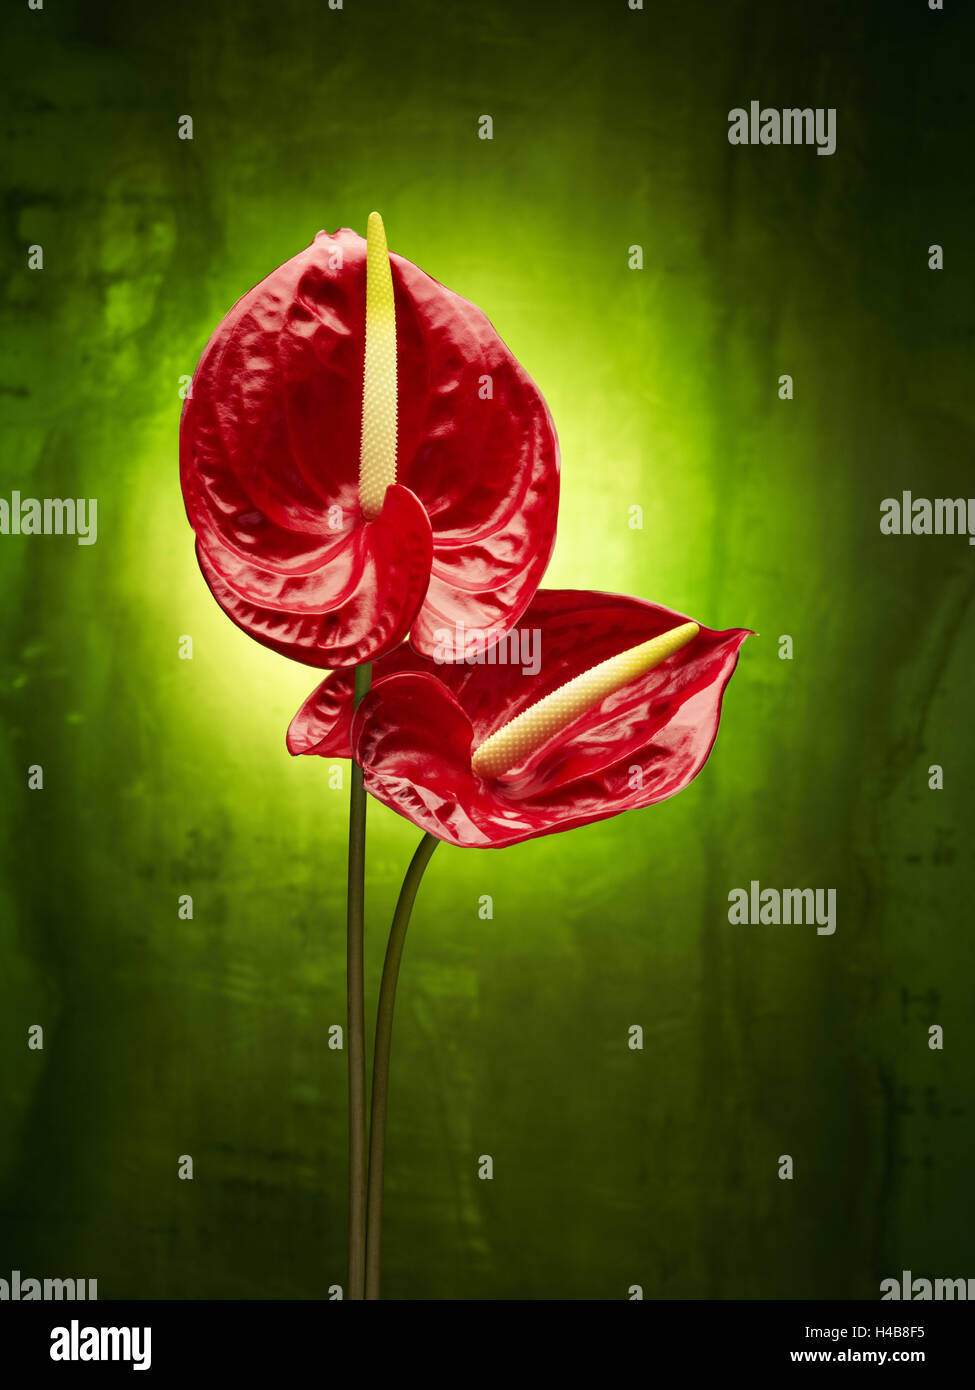 Anthurium, flower, blossoms, still life, red, green, Stock Photo